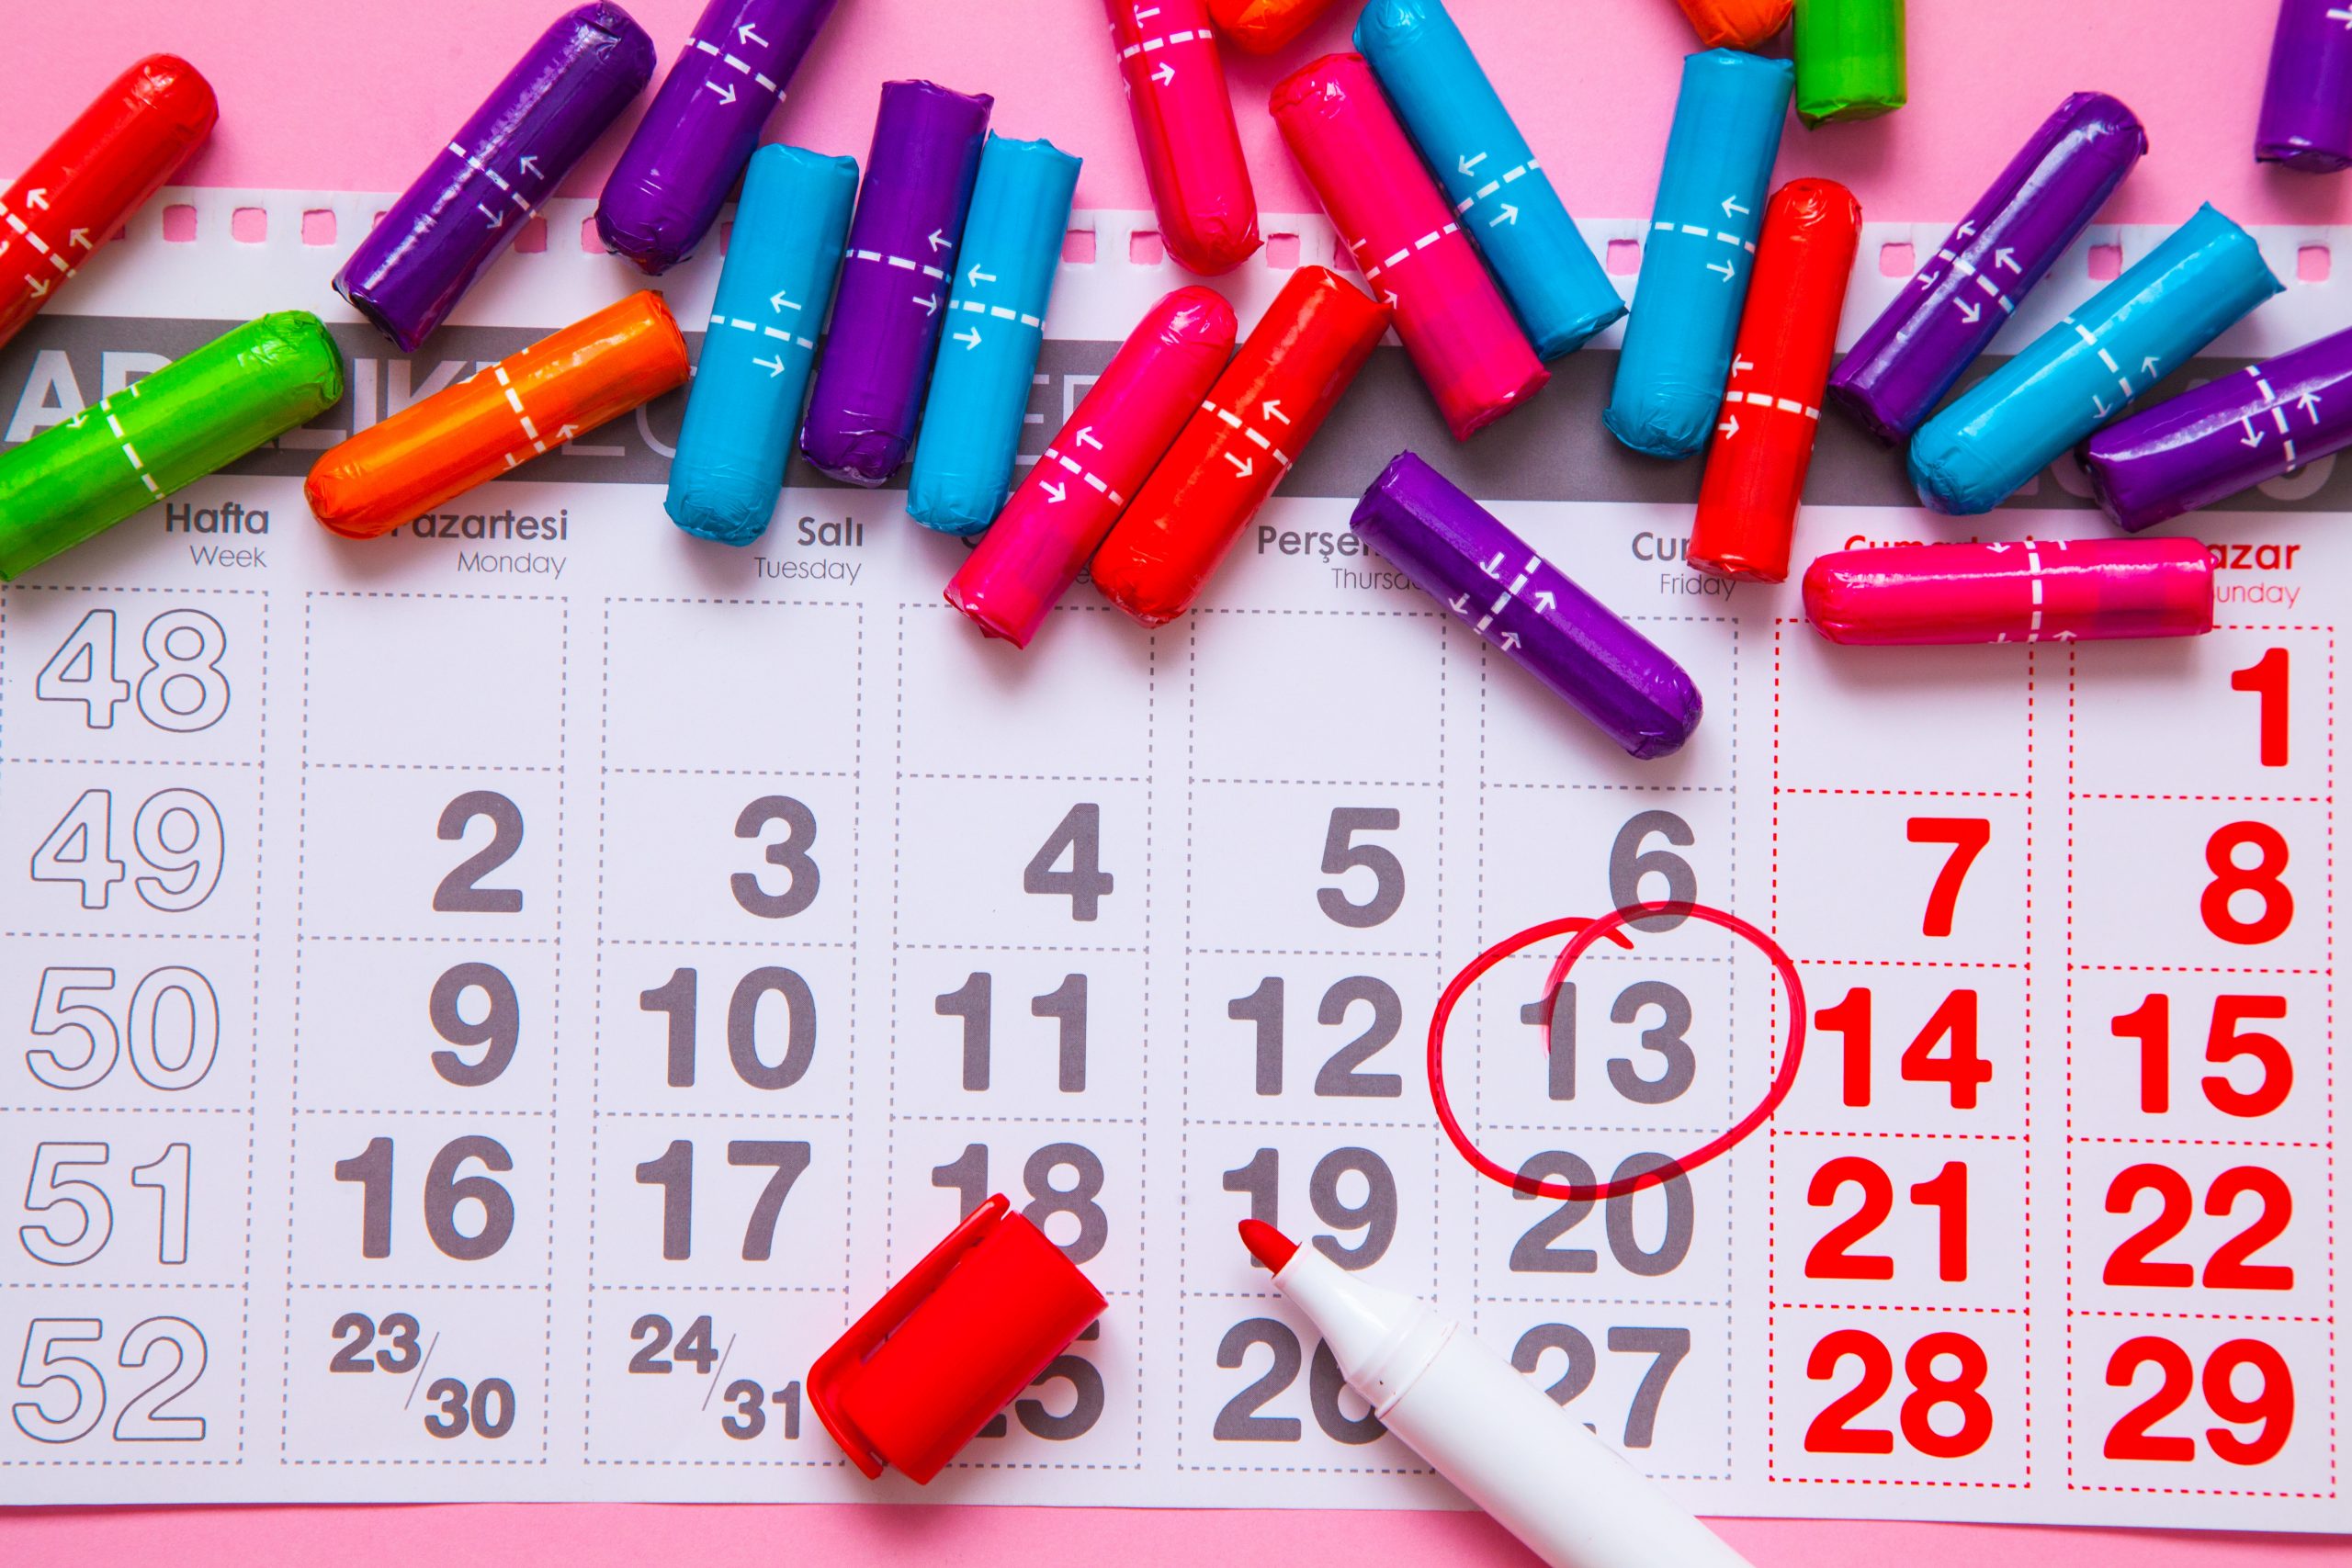 When is the fertile period? The calendar could help you.